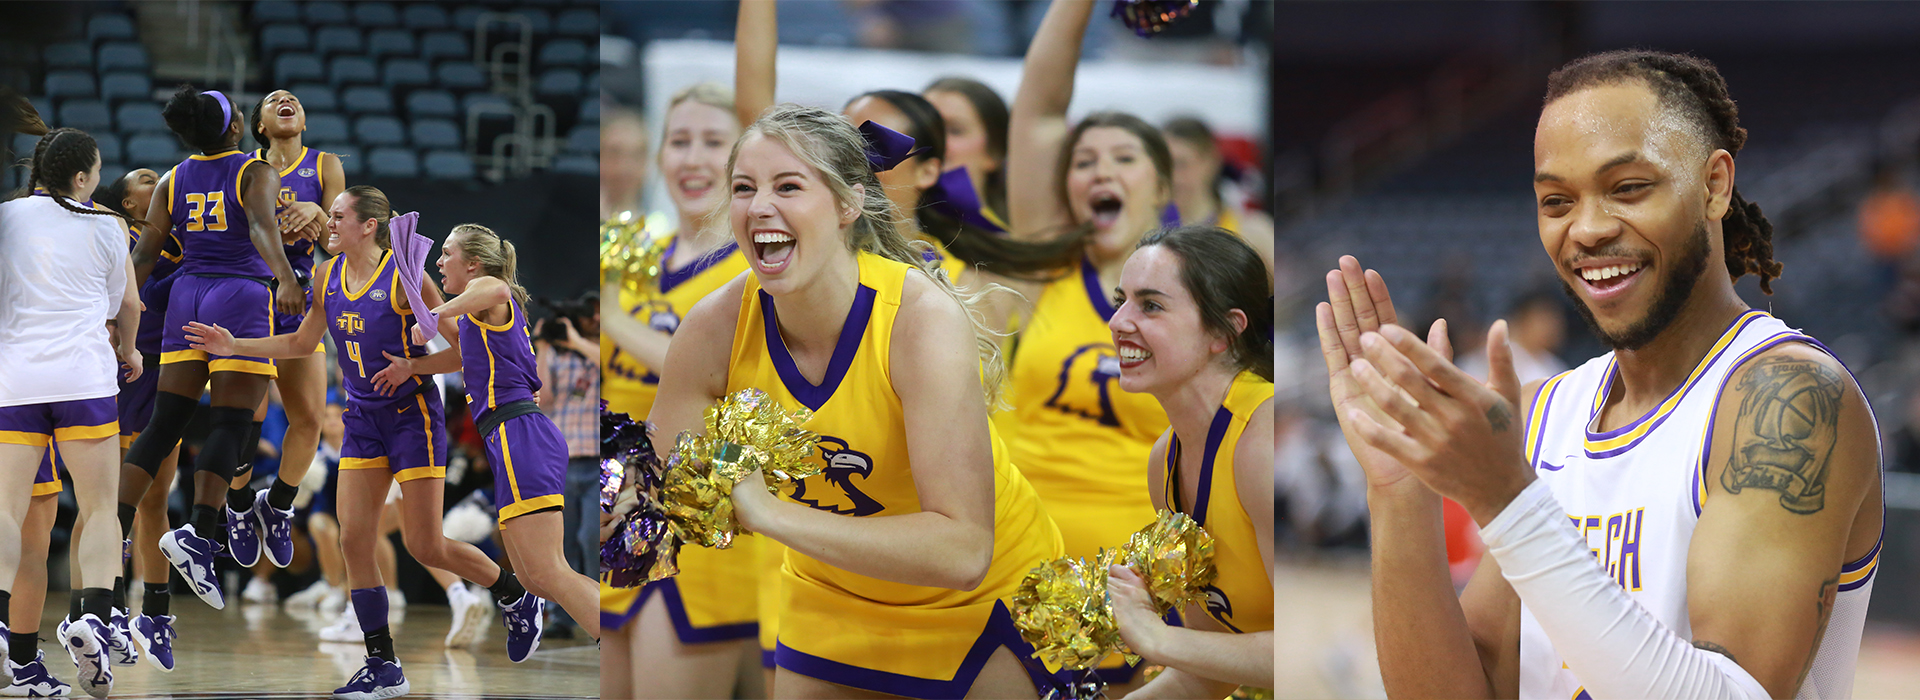 Join Tech basketball teams for send-offs to OVC championship games